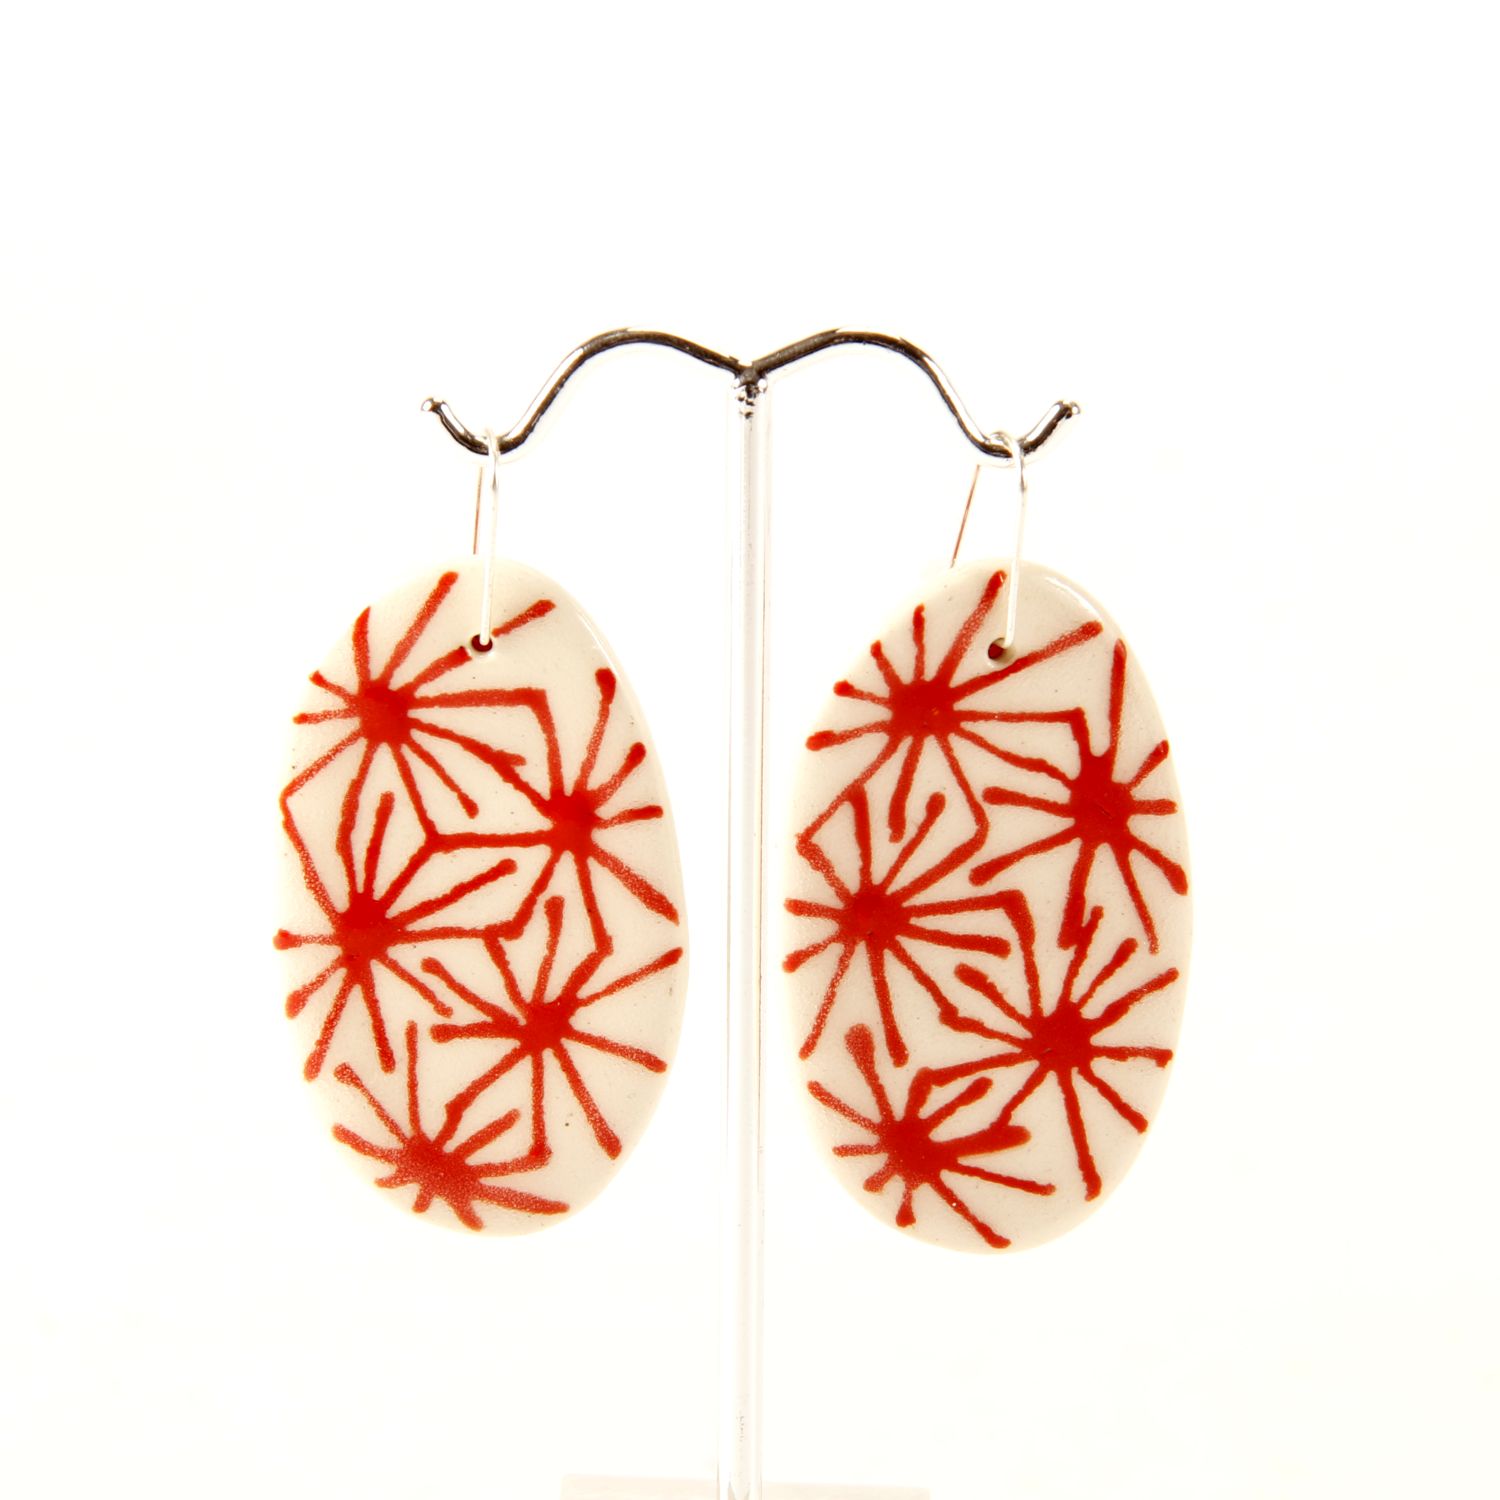 Here and Here: Disc Earrings with Fireworks Product Image 1 of 2